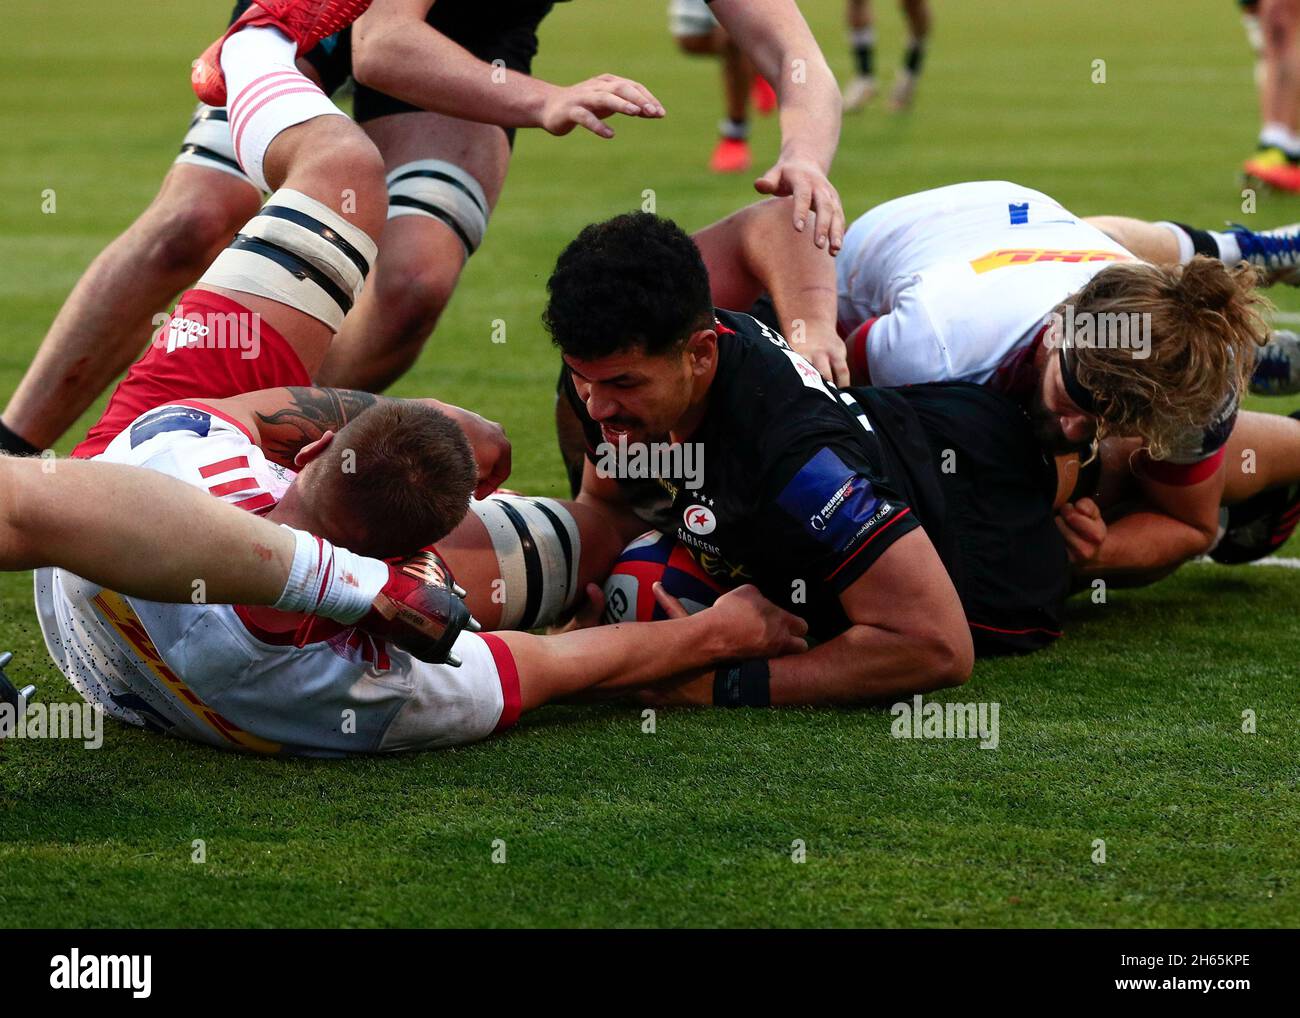 13th November 2021; StoneX Stadium, Saracens, London, England, Premiership Rugby Cup, Saracens versus Harlequins; Theo McFarland of Saracens with a try Stock Photo